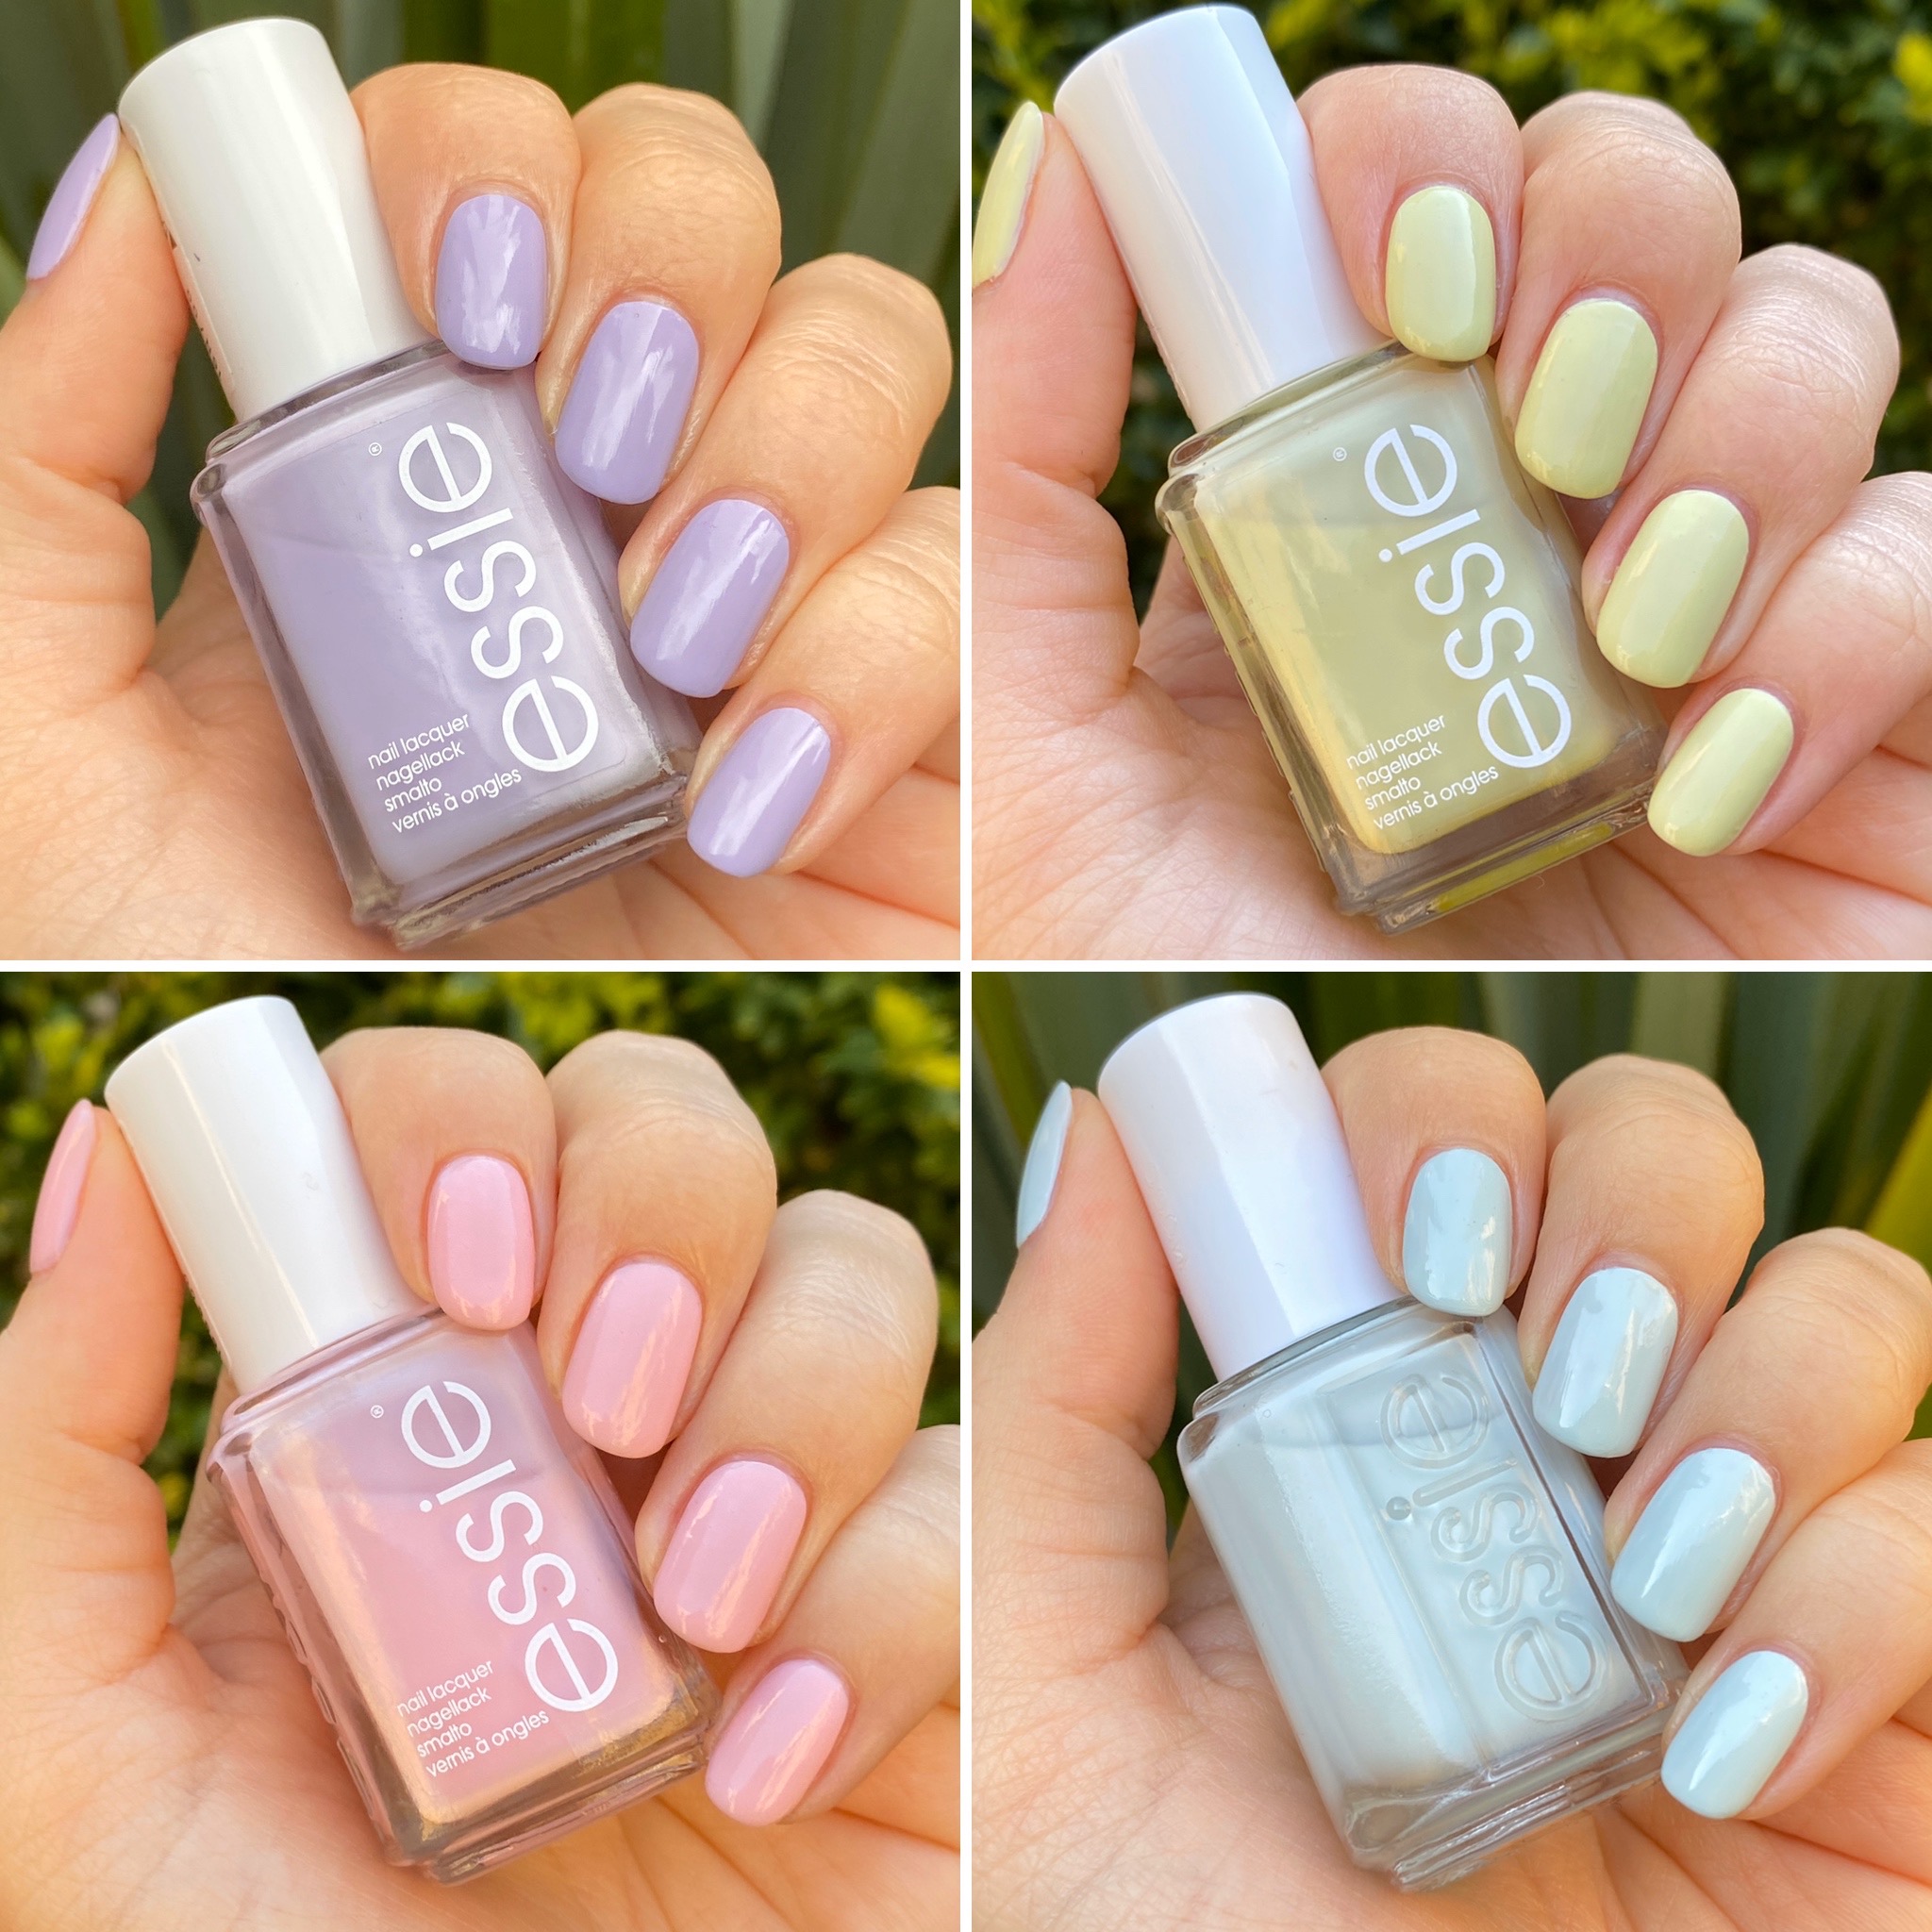 Pretty in Pastels 4 classic pastels by Essie  The Nail Polish Sh3lf